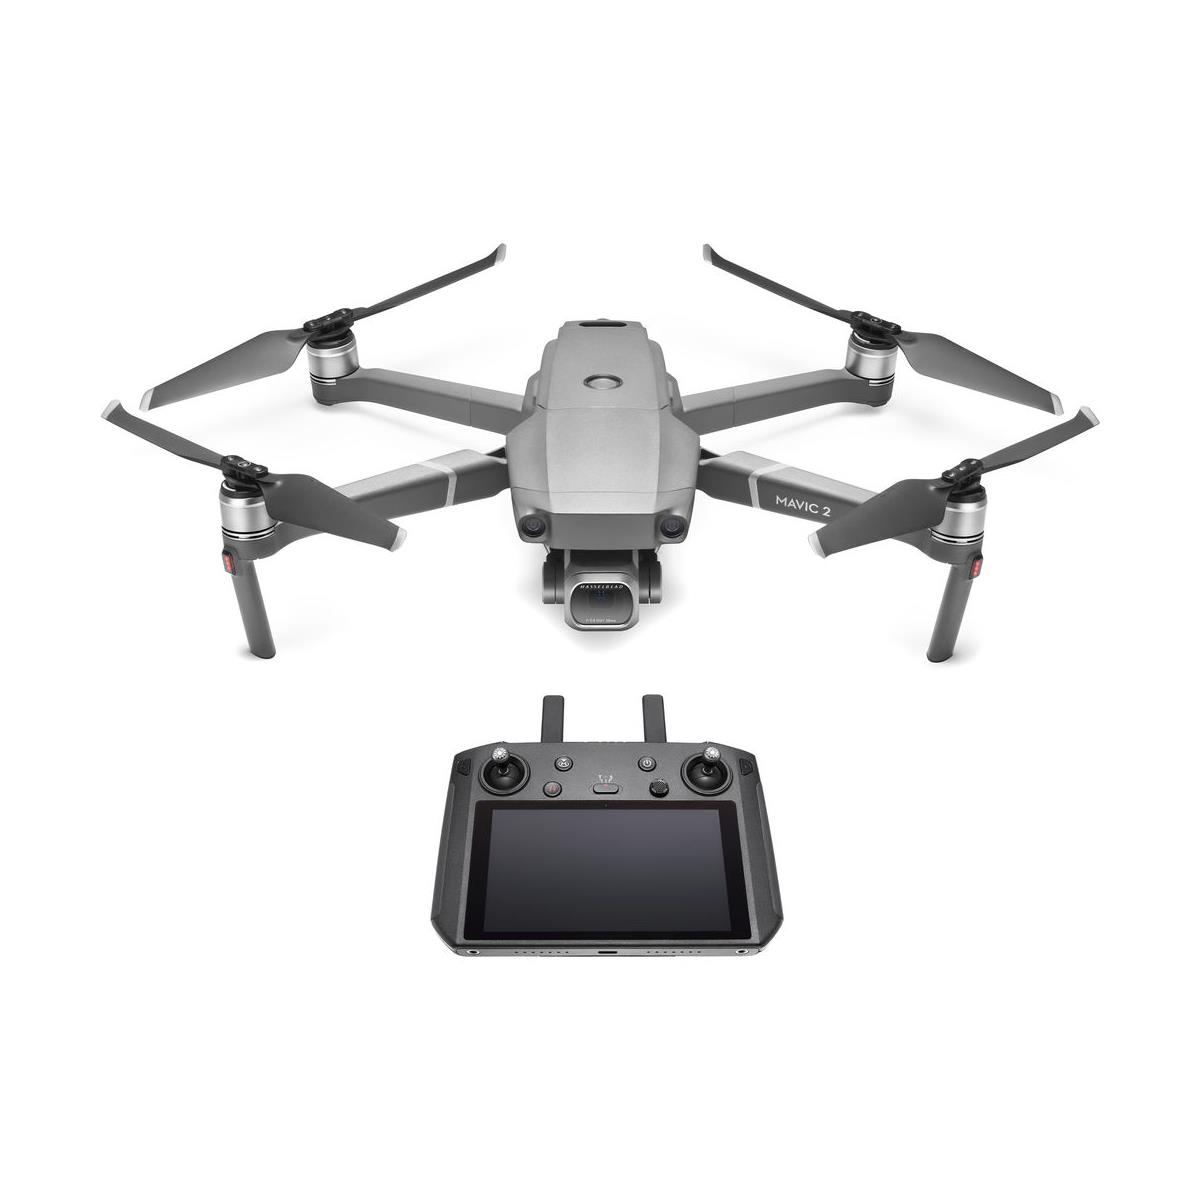 Image of DJI Mavic 2 Pro Drone with Smart Controller